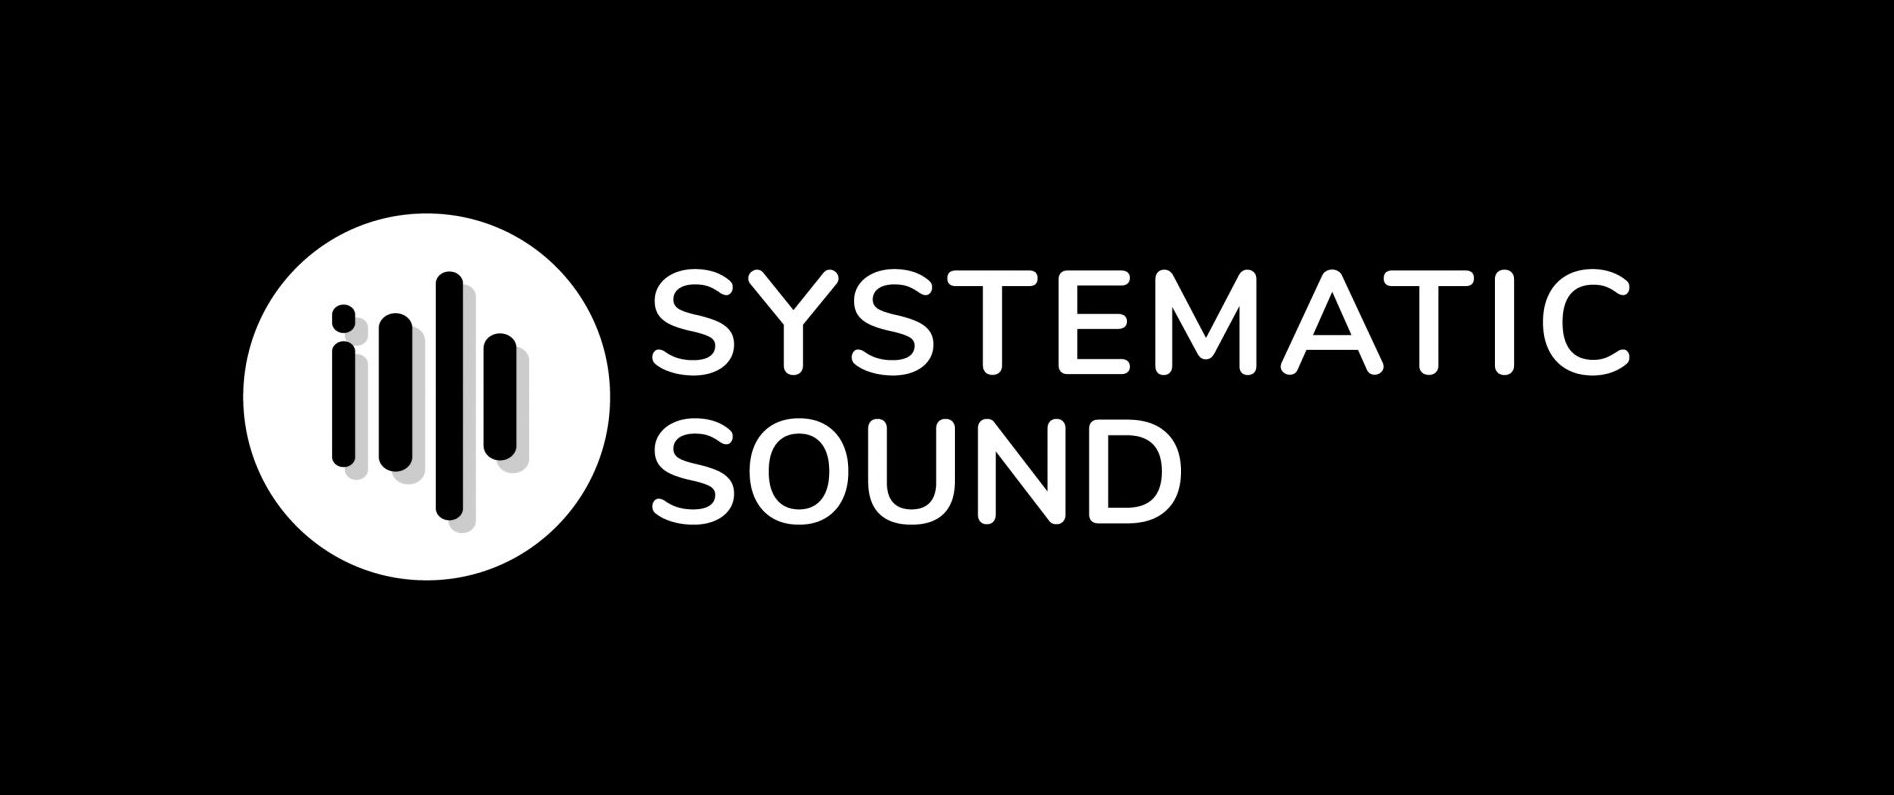 Systematic Sound is here!